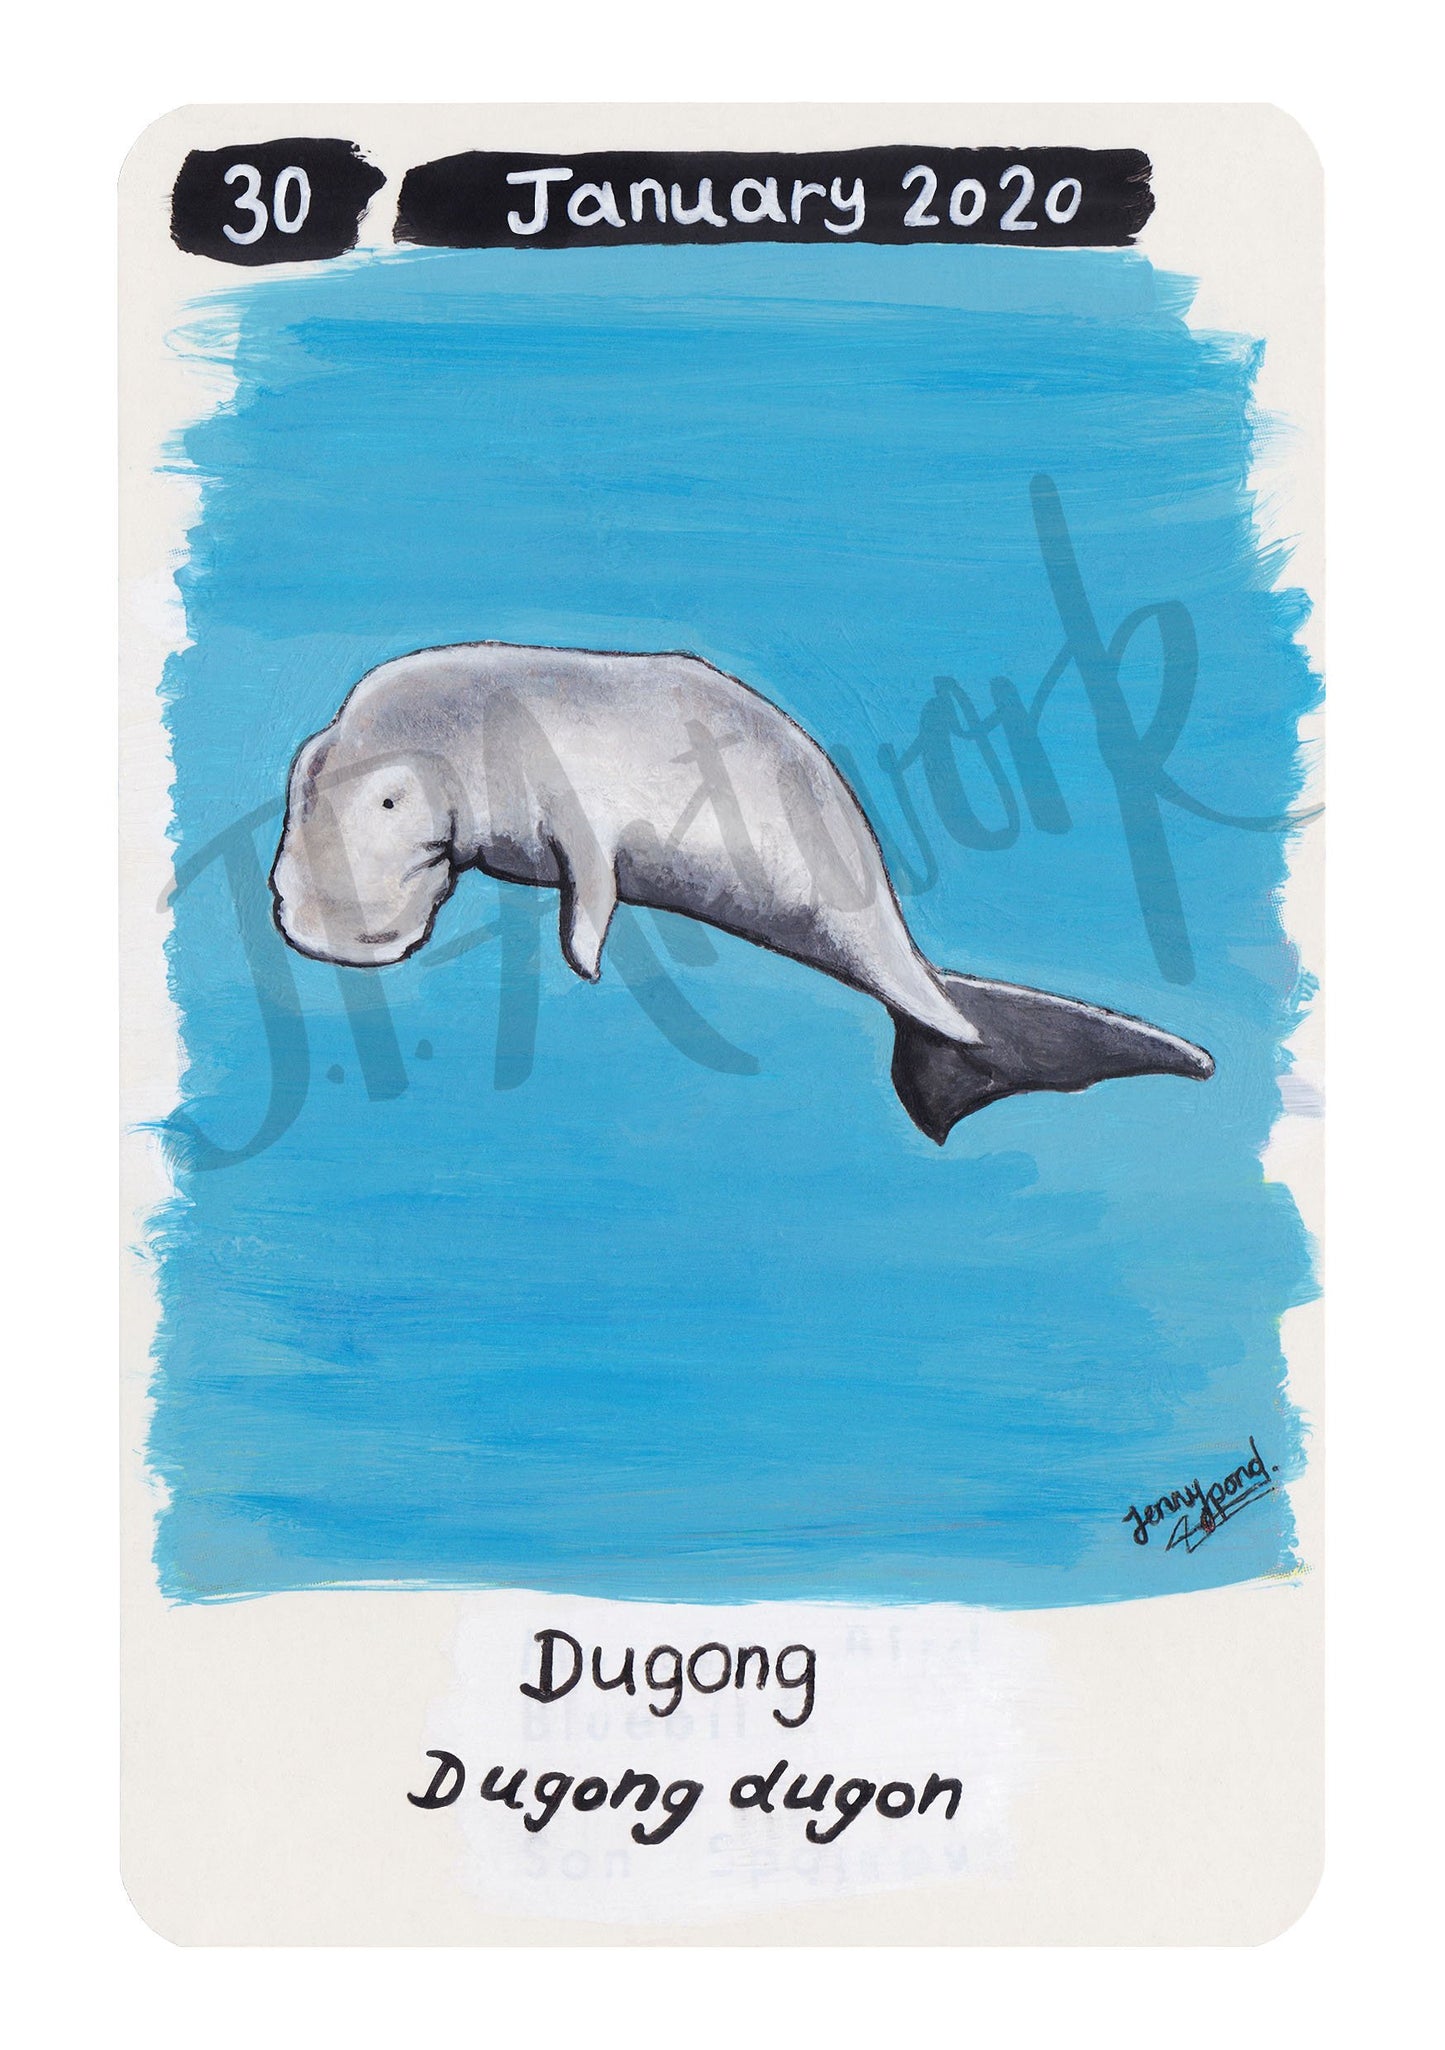 Dugong Limited Edition A5 Hemp Paper Print by Jenny Pond, JPArtwork